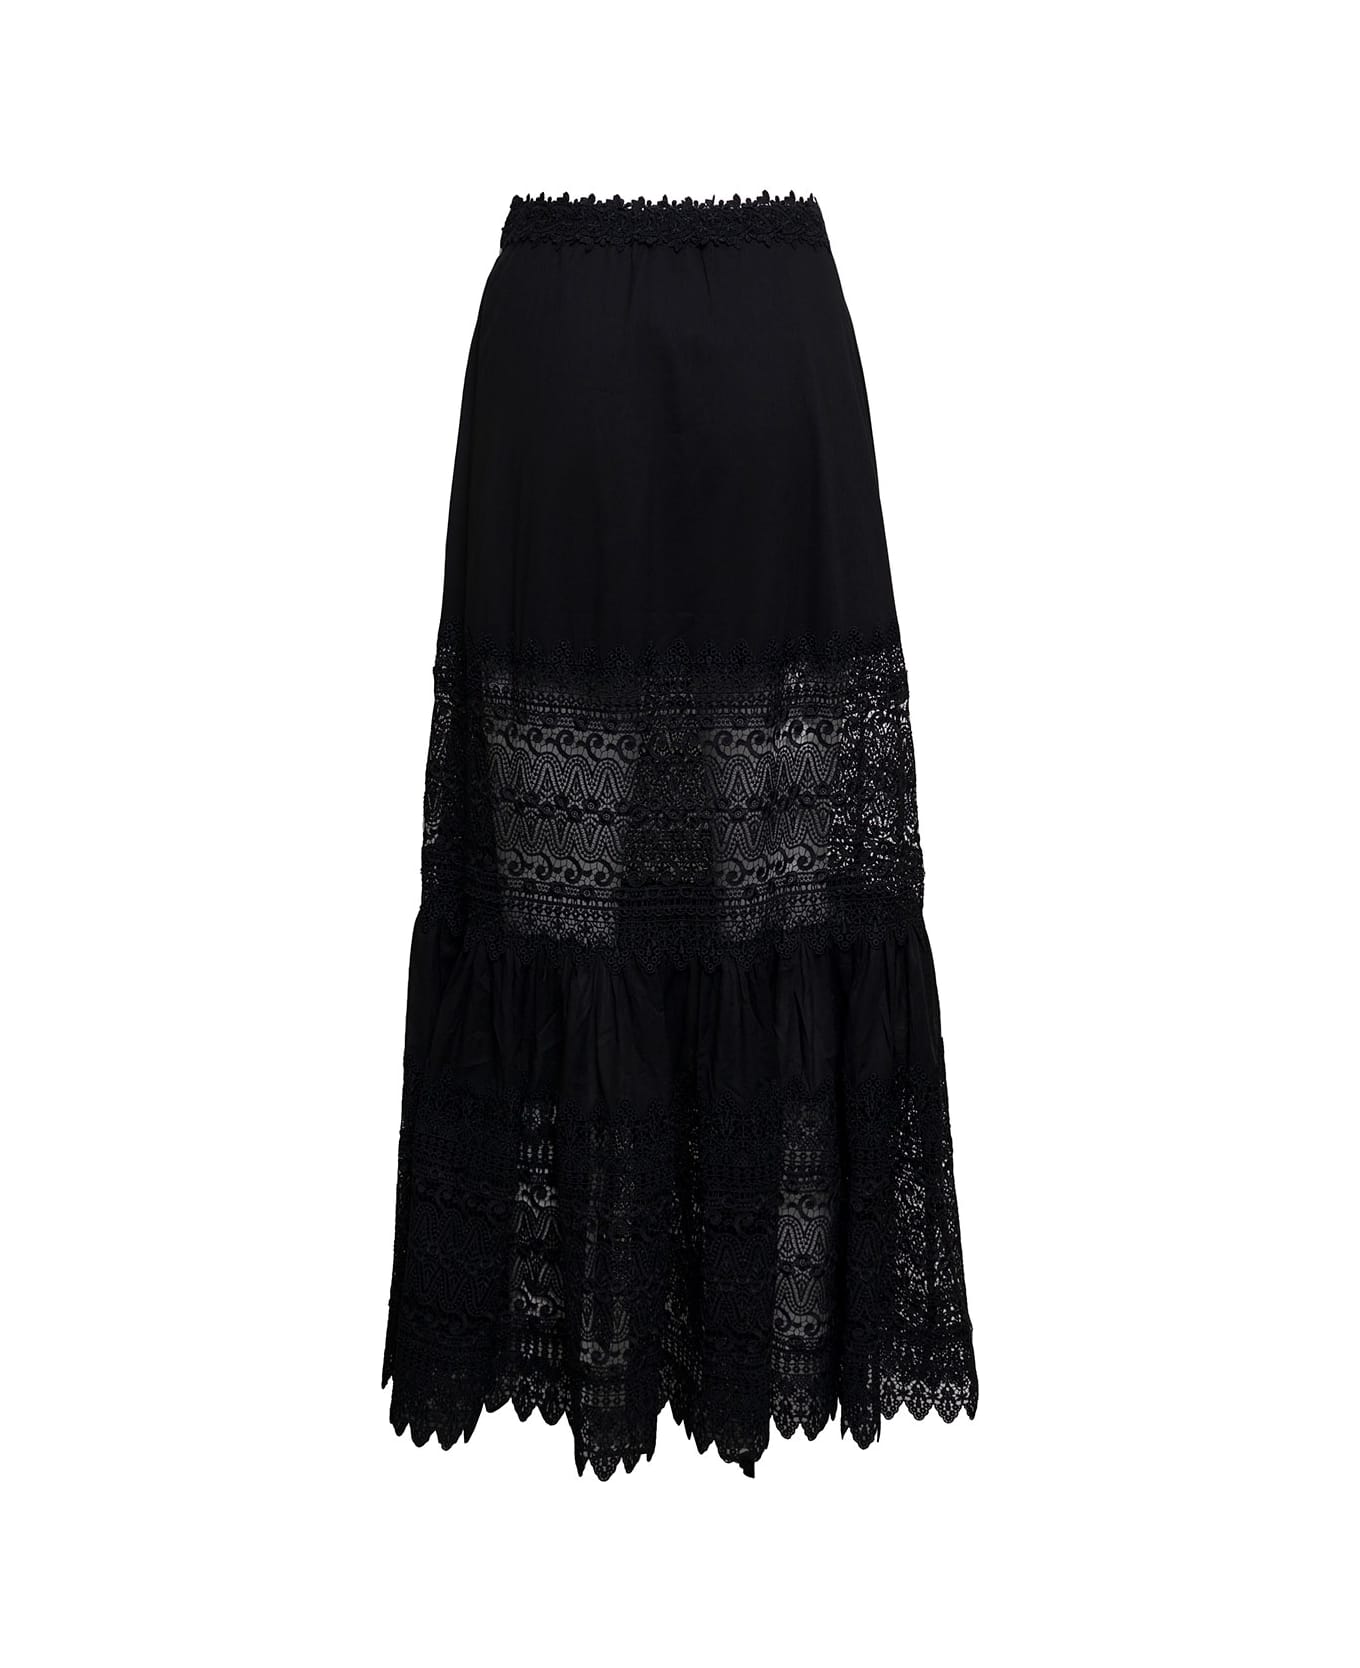 Charo Ruiz 'viola' Black Flounced Skirt With Lace Inserts In Cotton Blend Woman - Black